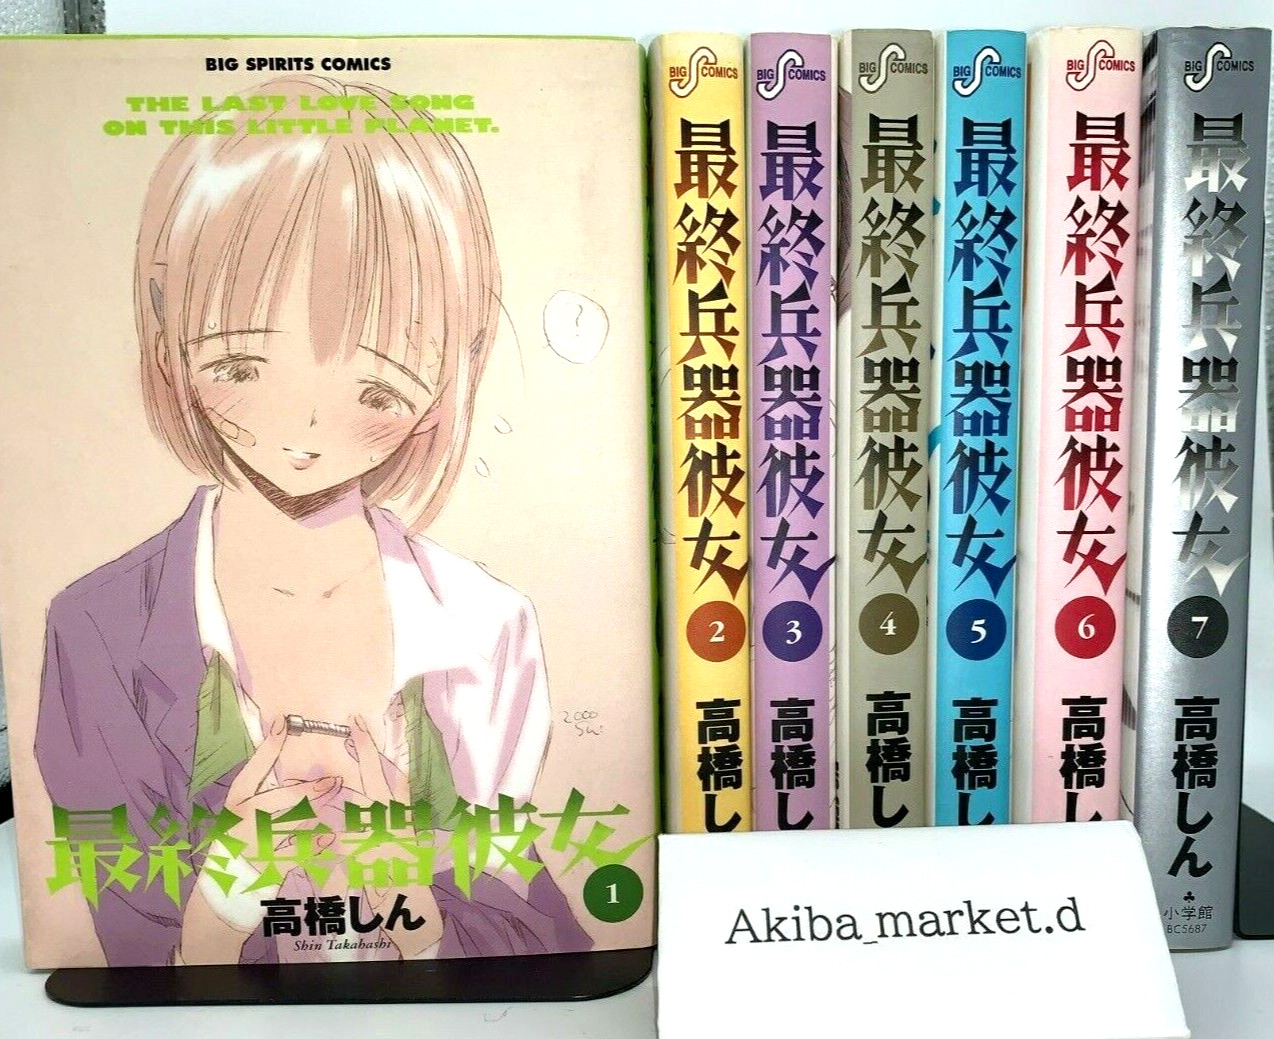 SAIKANO Vol 1-7 + 1 THE LAST LOVE SONG ON THIS LITTLE PLANET Manga Complete Set